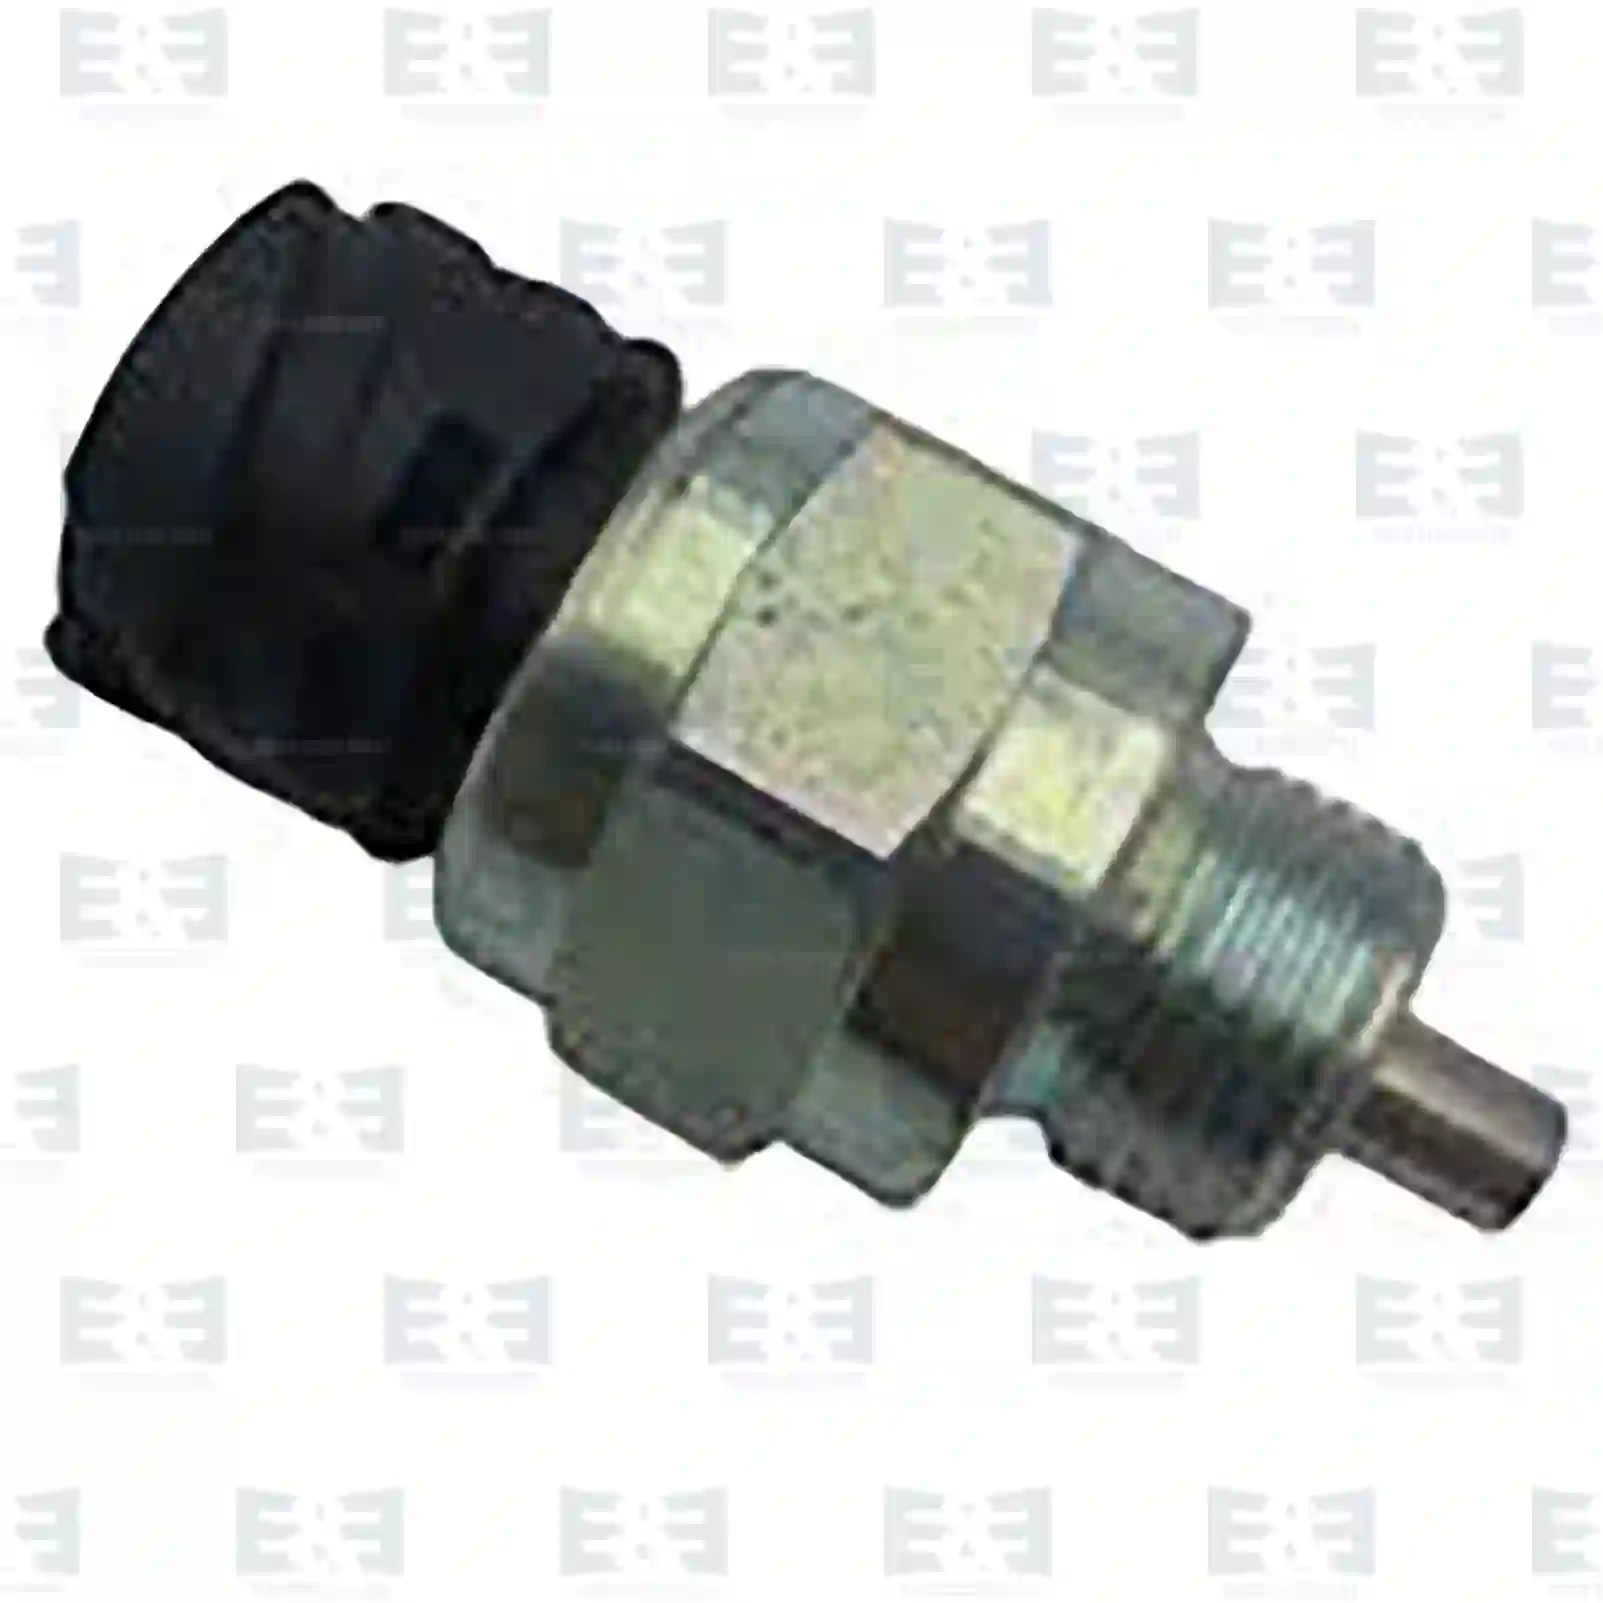 Gearbox Switch, EE No 2E2279468 ,  oem no:1232373, 1447974, 1378644, 1387100, 1420005, 1423971, 1423974, 1423976, 1423977, 1472739, 22194568, 22354201, 3197871, ZG20959-0008 E&E Truck Spare Parts | Truck Spare Parts, Auotomotive Spare Parts